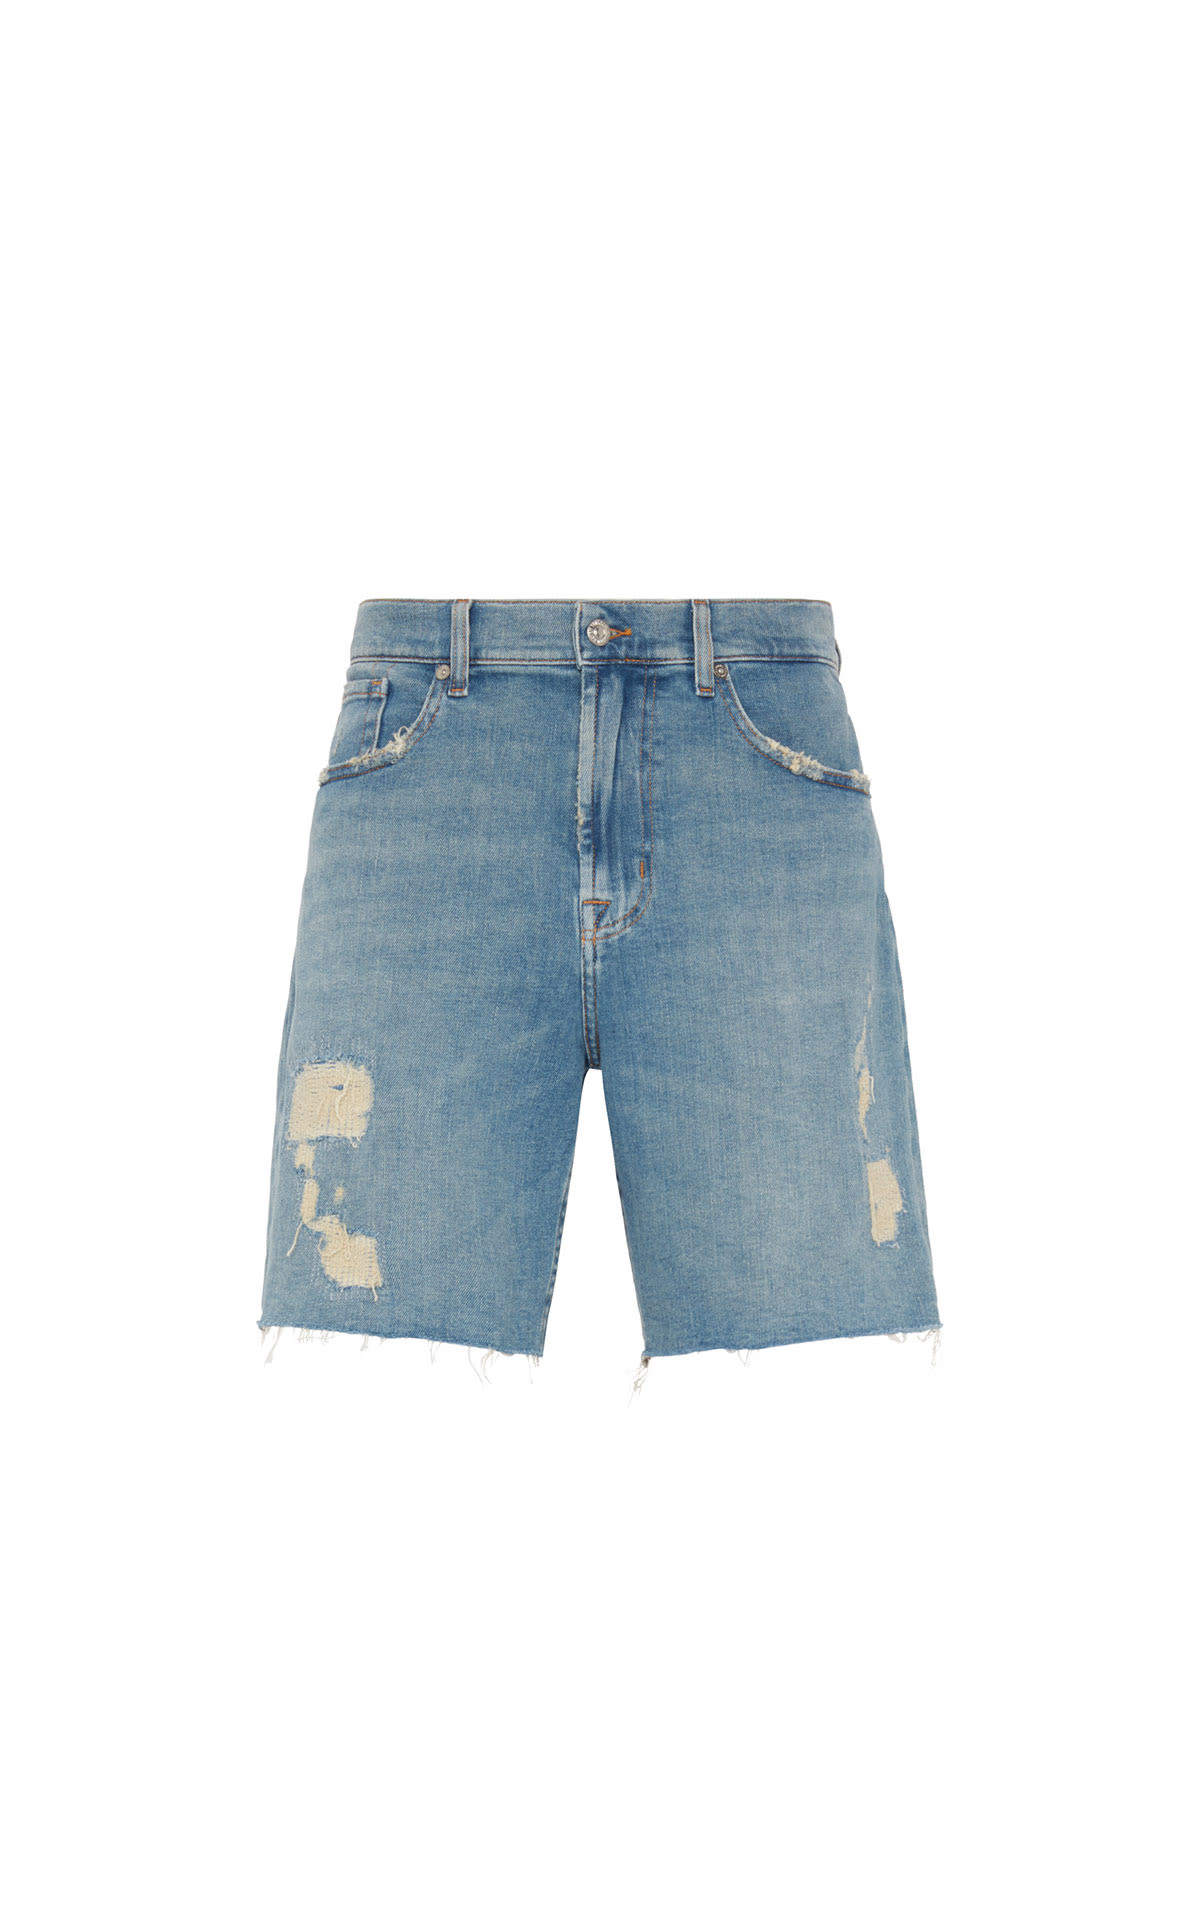 7 For all Mankind Cooper j short from Bicester Village